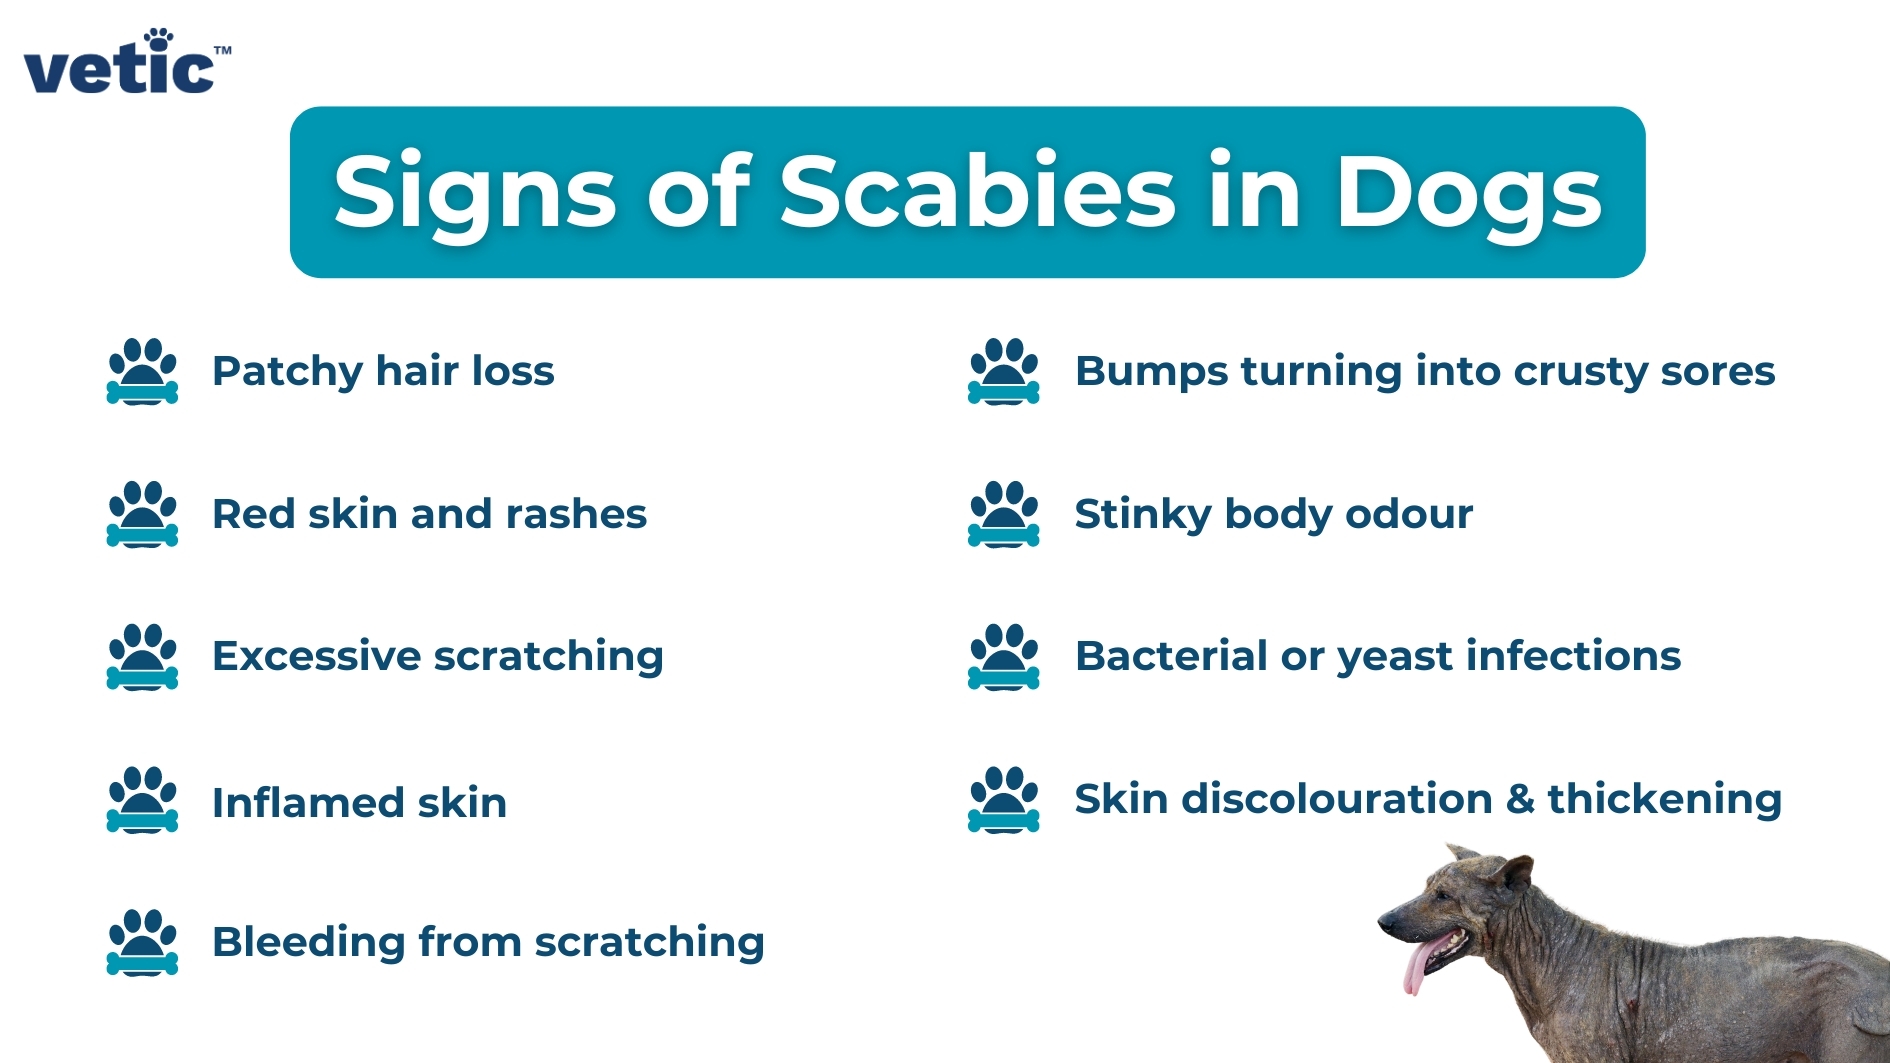 An informational image by Vetic listing the signs of scabies in dogs, including symptoms like patchy hair loss and red skin, with an image of a dog on the right. The signs of scabies in dogs include - Patchy hair loss Red skin and rashes Excessive scratching Inflamed skin Bleeding from scratching Bumps turning into crusty sores Stinky body odour Bacterial or yeast infections Skin discolouration & thickening